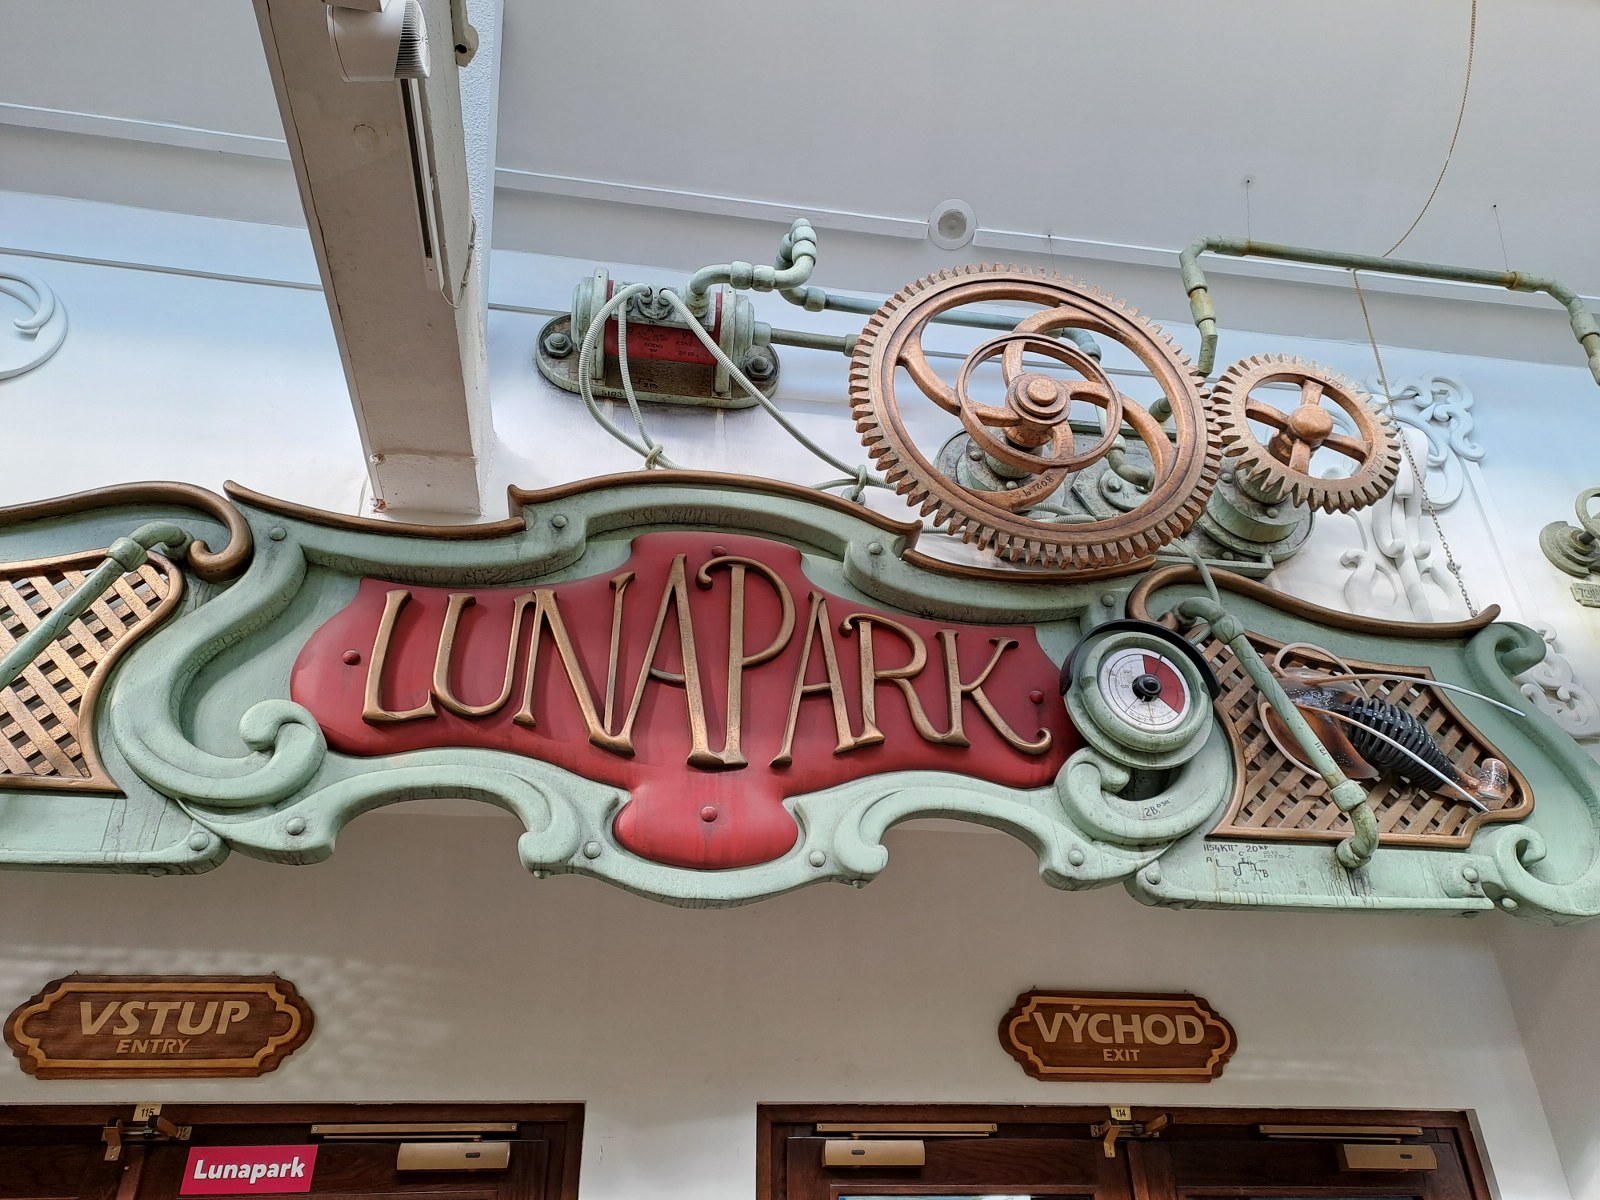 VIRTUAL REALITY IN LUNAPARK IS OUT OF OPERATION